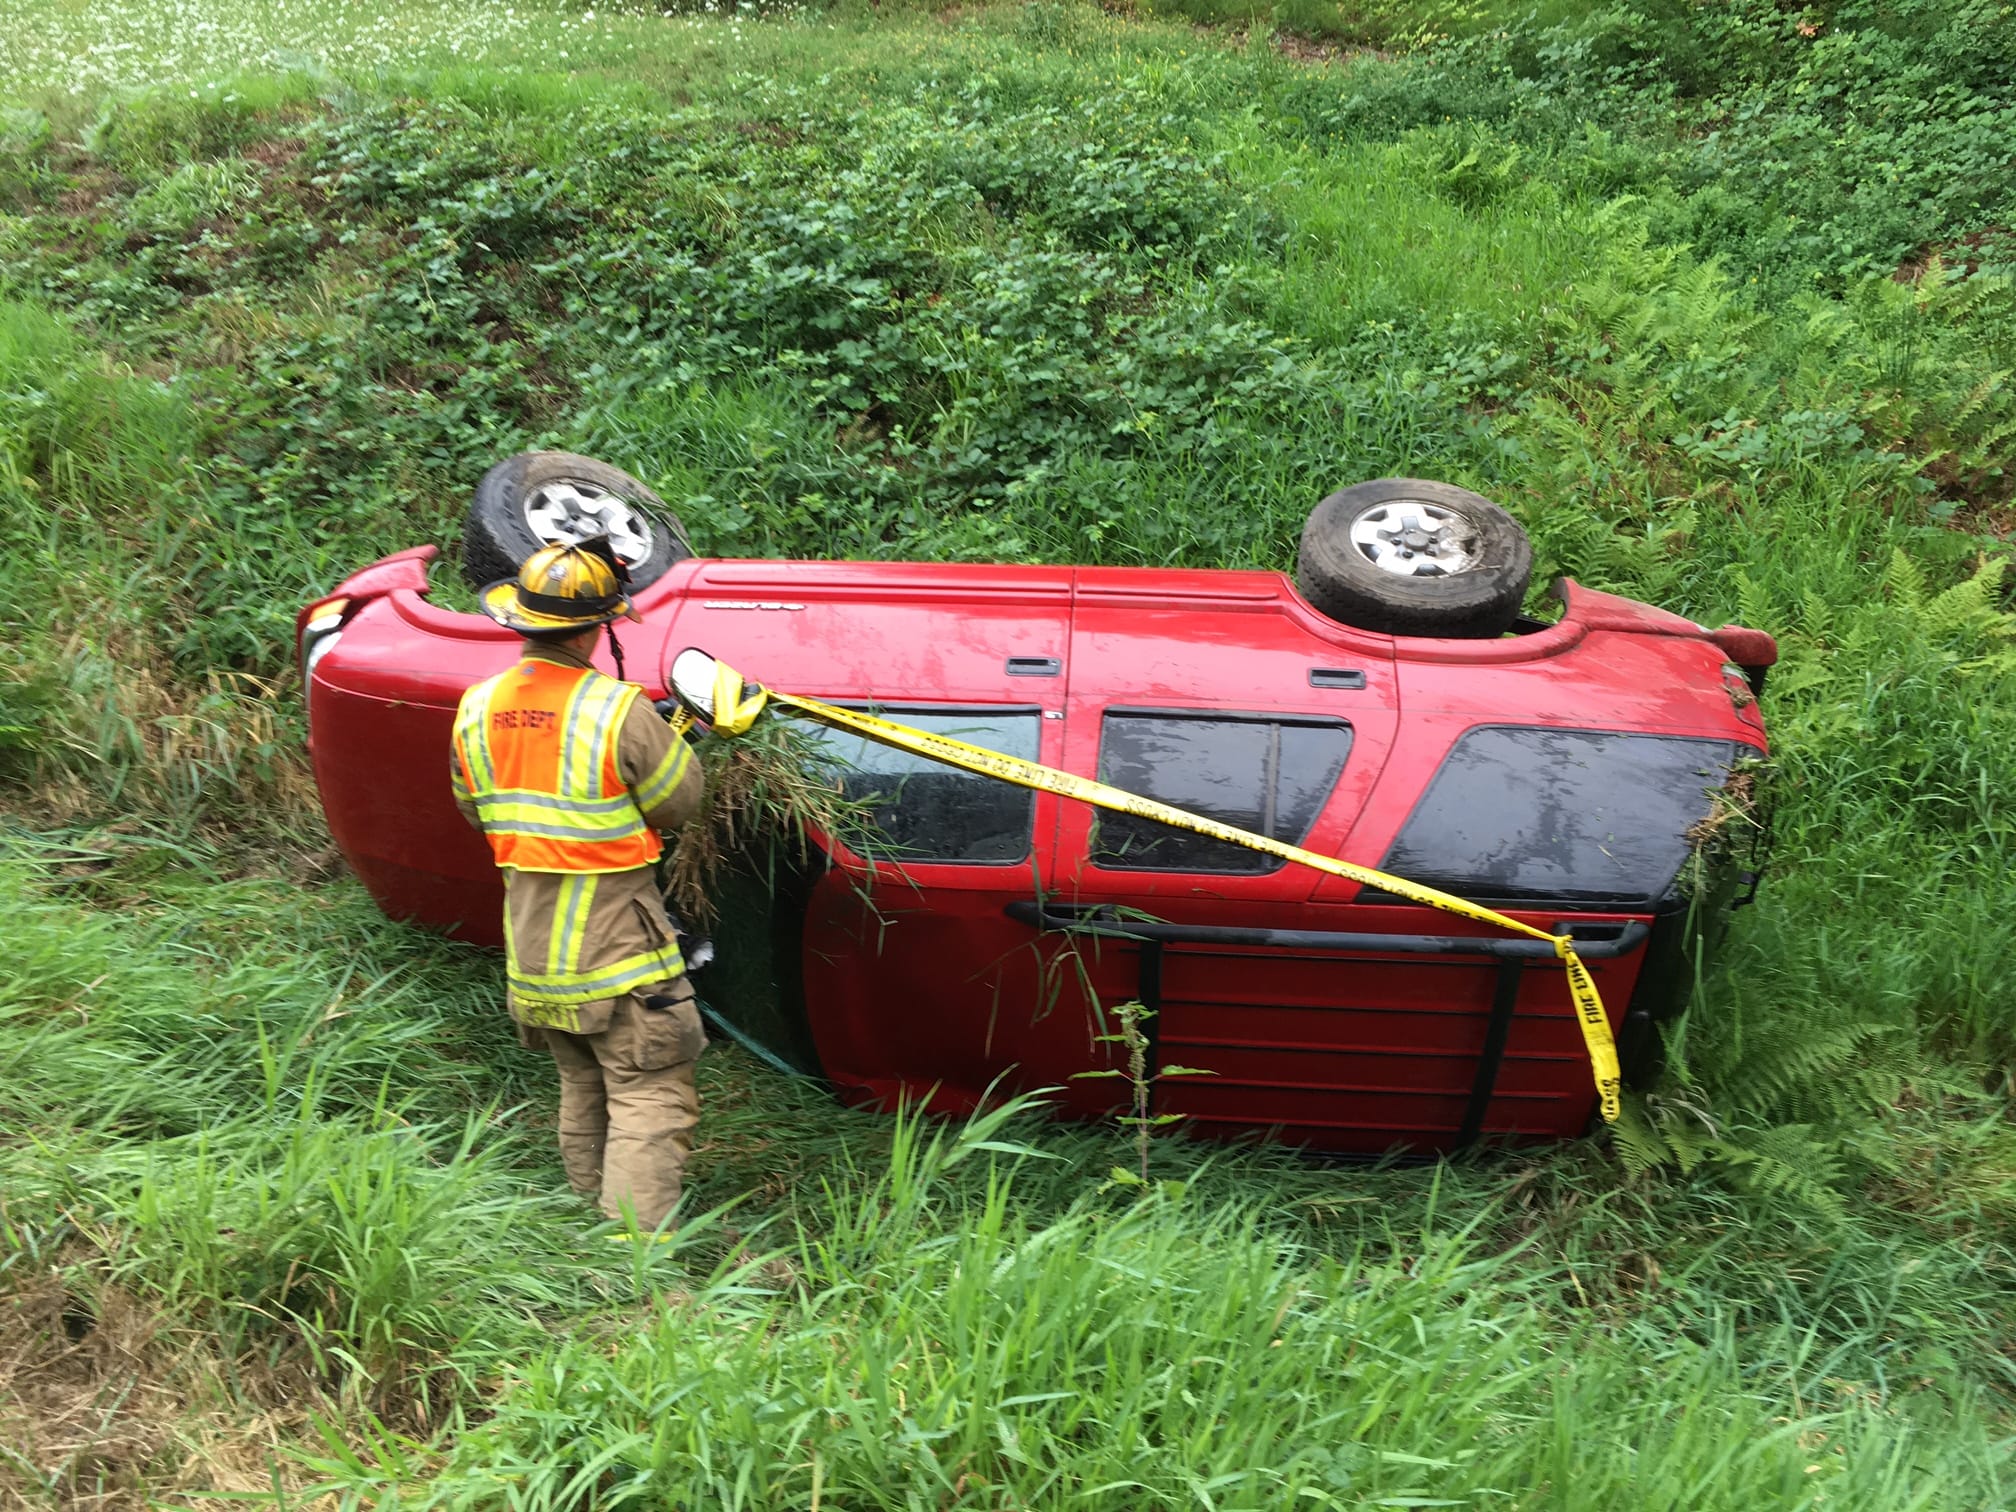 A firefighter responds following a rollover crash near Daybreak Park around 11:30 a.m. Wednesday. No one was seriously hurt, but officials are reminding drivers that the first rain after a long dry period is bringing up oil in the roadways, making them extra slick.